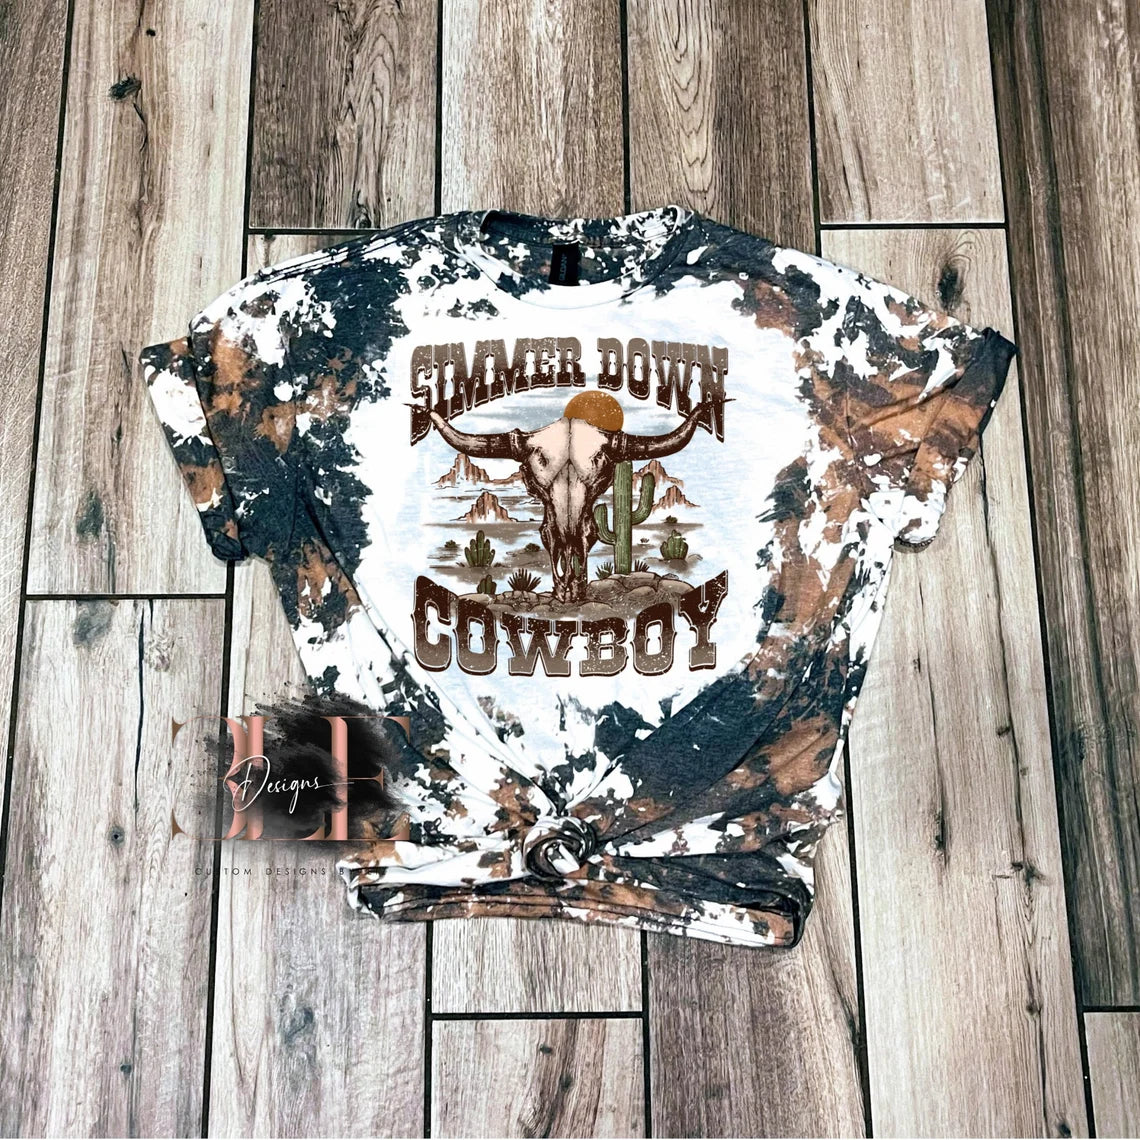 Simmer Down Cowboy Cow Print Bleached Sublimation T-shirt, Tie-Dye Bleached Shirt, Country Girl T-Shirt, Country Clothes, Cow Hide Shirt